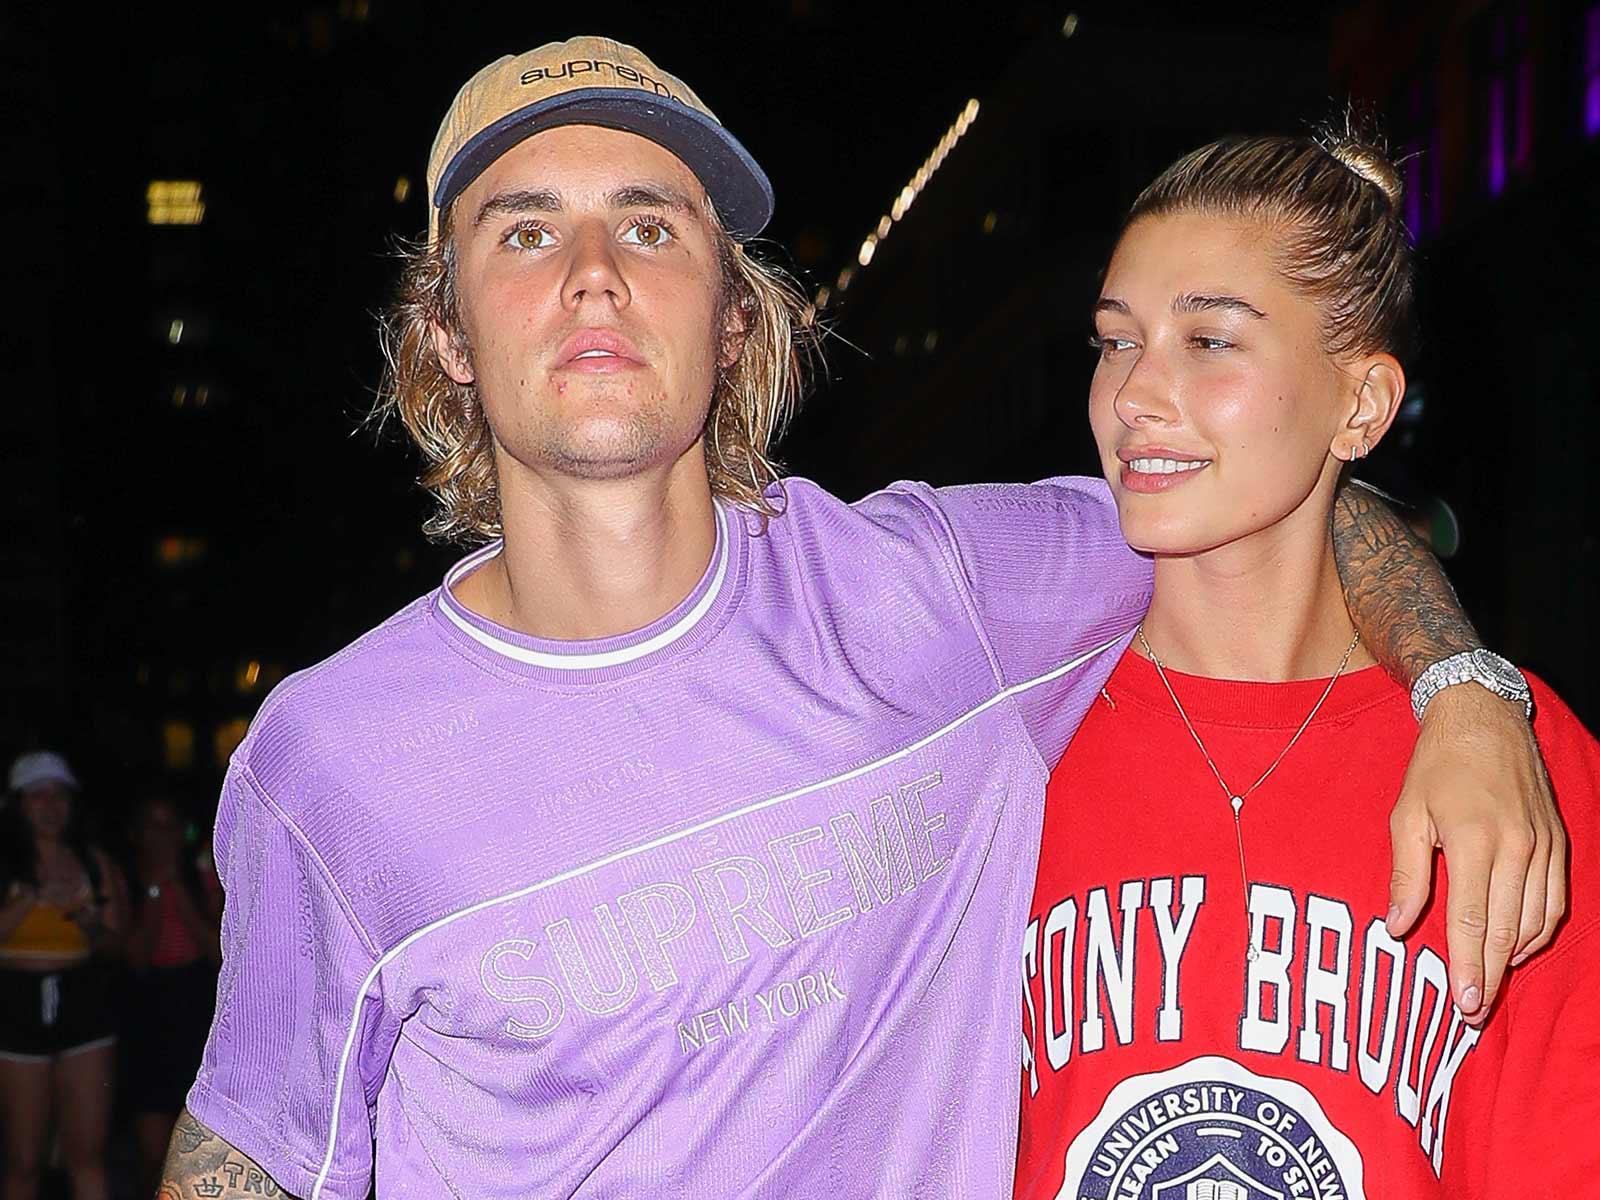 Justin Bieber & Hailey Baldwin Get Marriage License, Could Tie the Knot at Any Moment